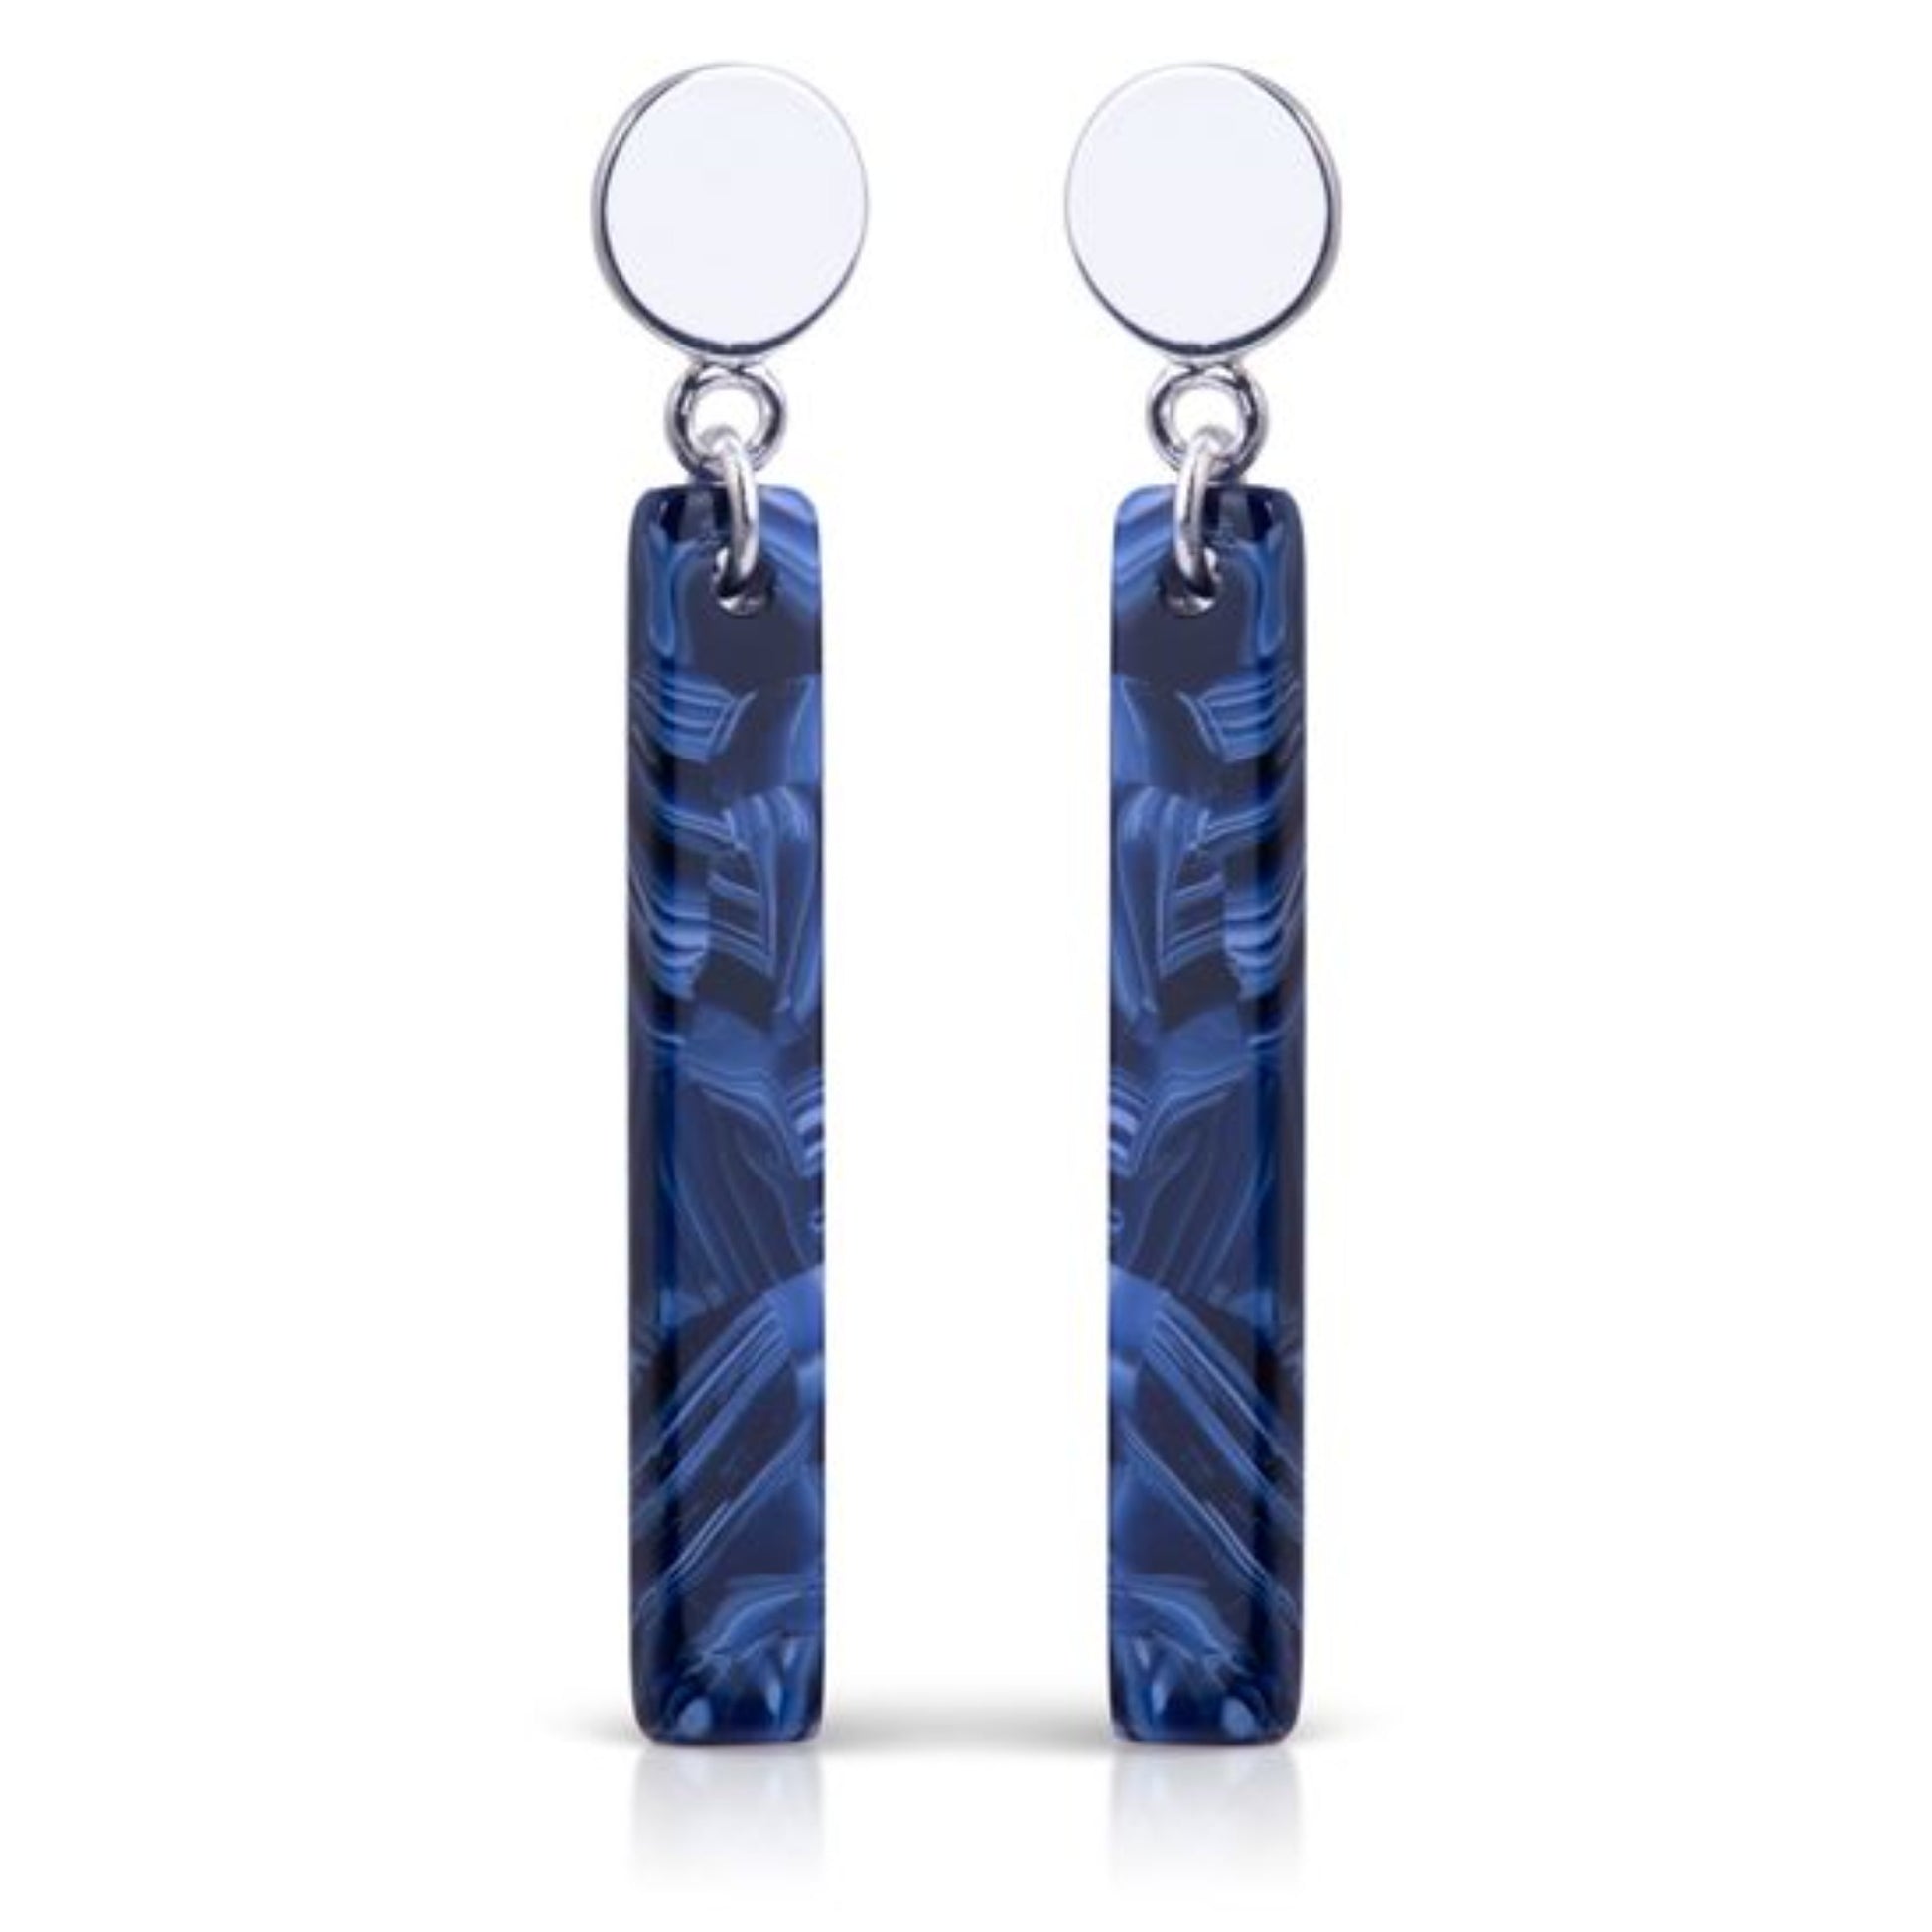 New! Lightweight earrings are made of Acetate and Sterling Silver Plating and Surgical Steel posts. No polishing required. Round stud. Beautiful shades of navy and blues in a Bar Drop design. Handmade so no two are like. Comes with disc back and rubber back. The first photo is a stock picture, the others are of the actual earring for sale. Approximate length: From stud about 1.50 inches